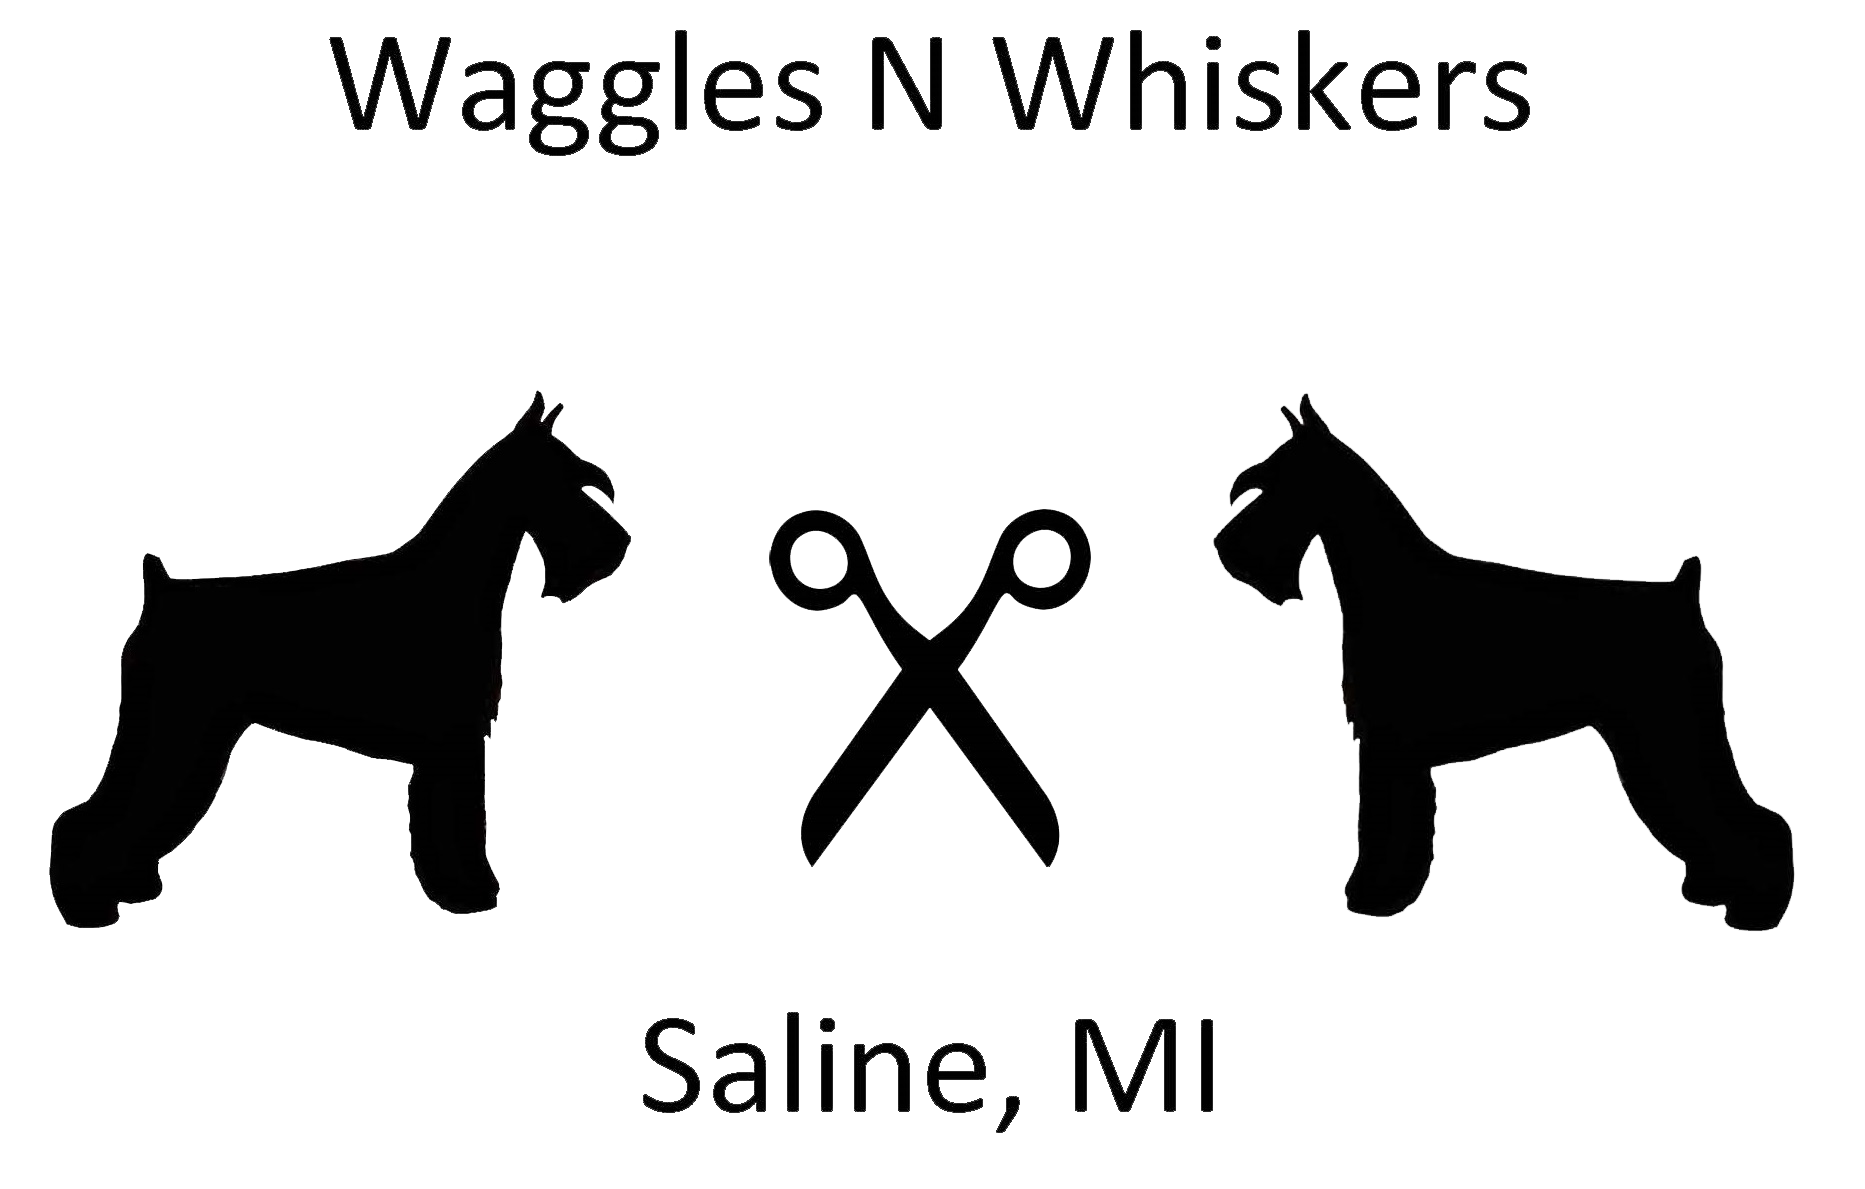 waggle n whiskers logo